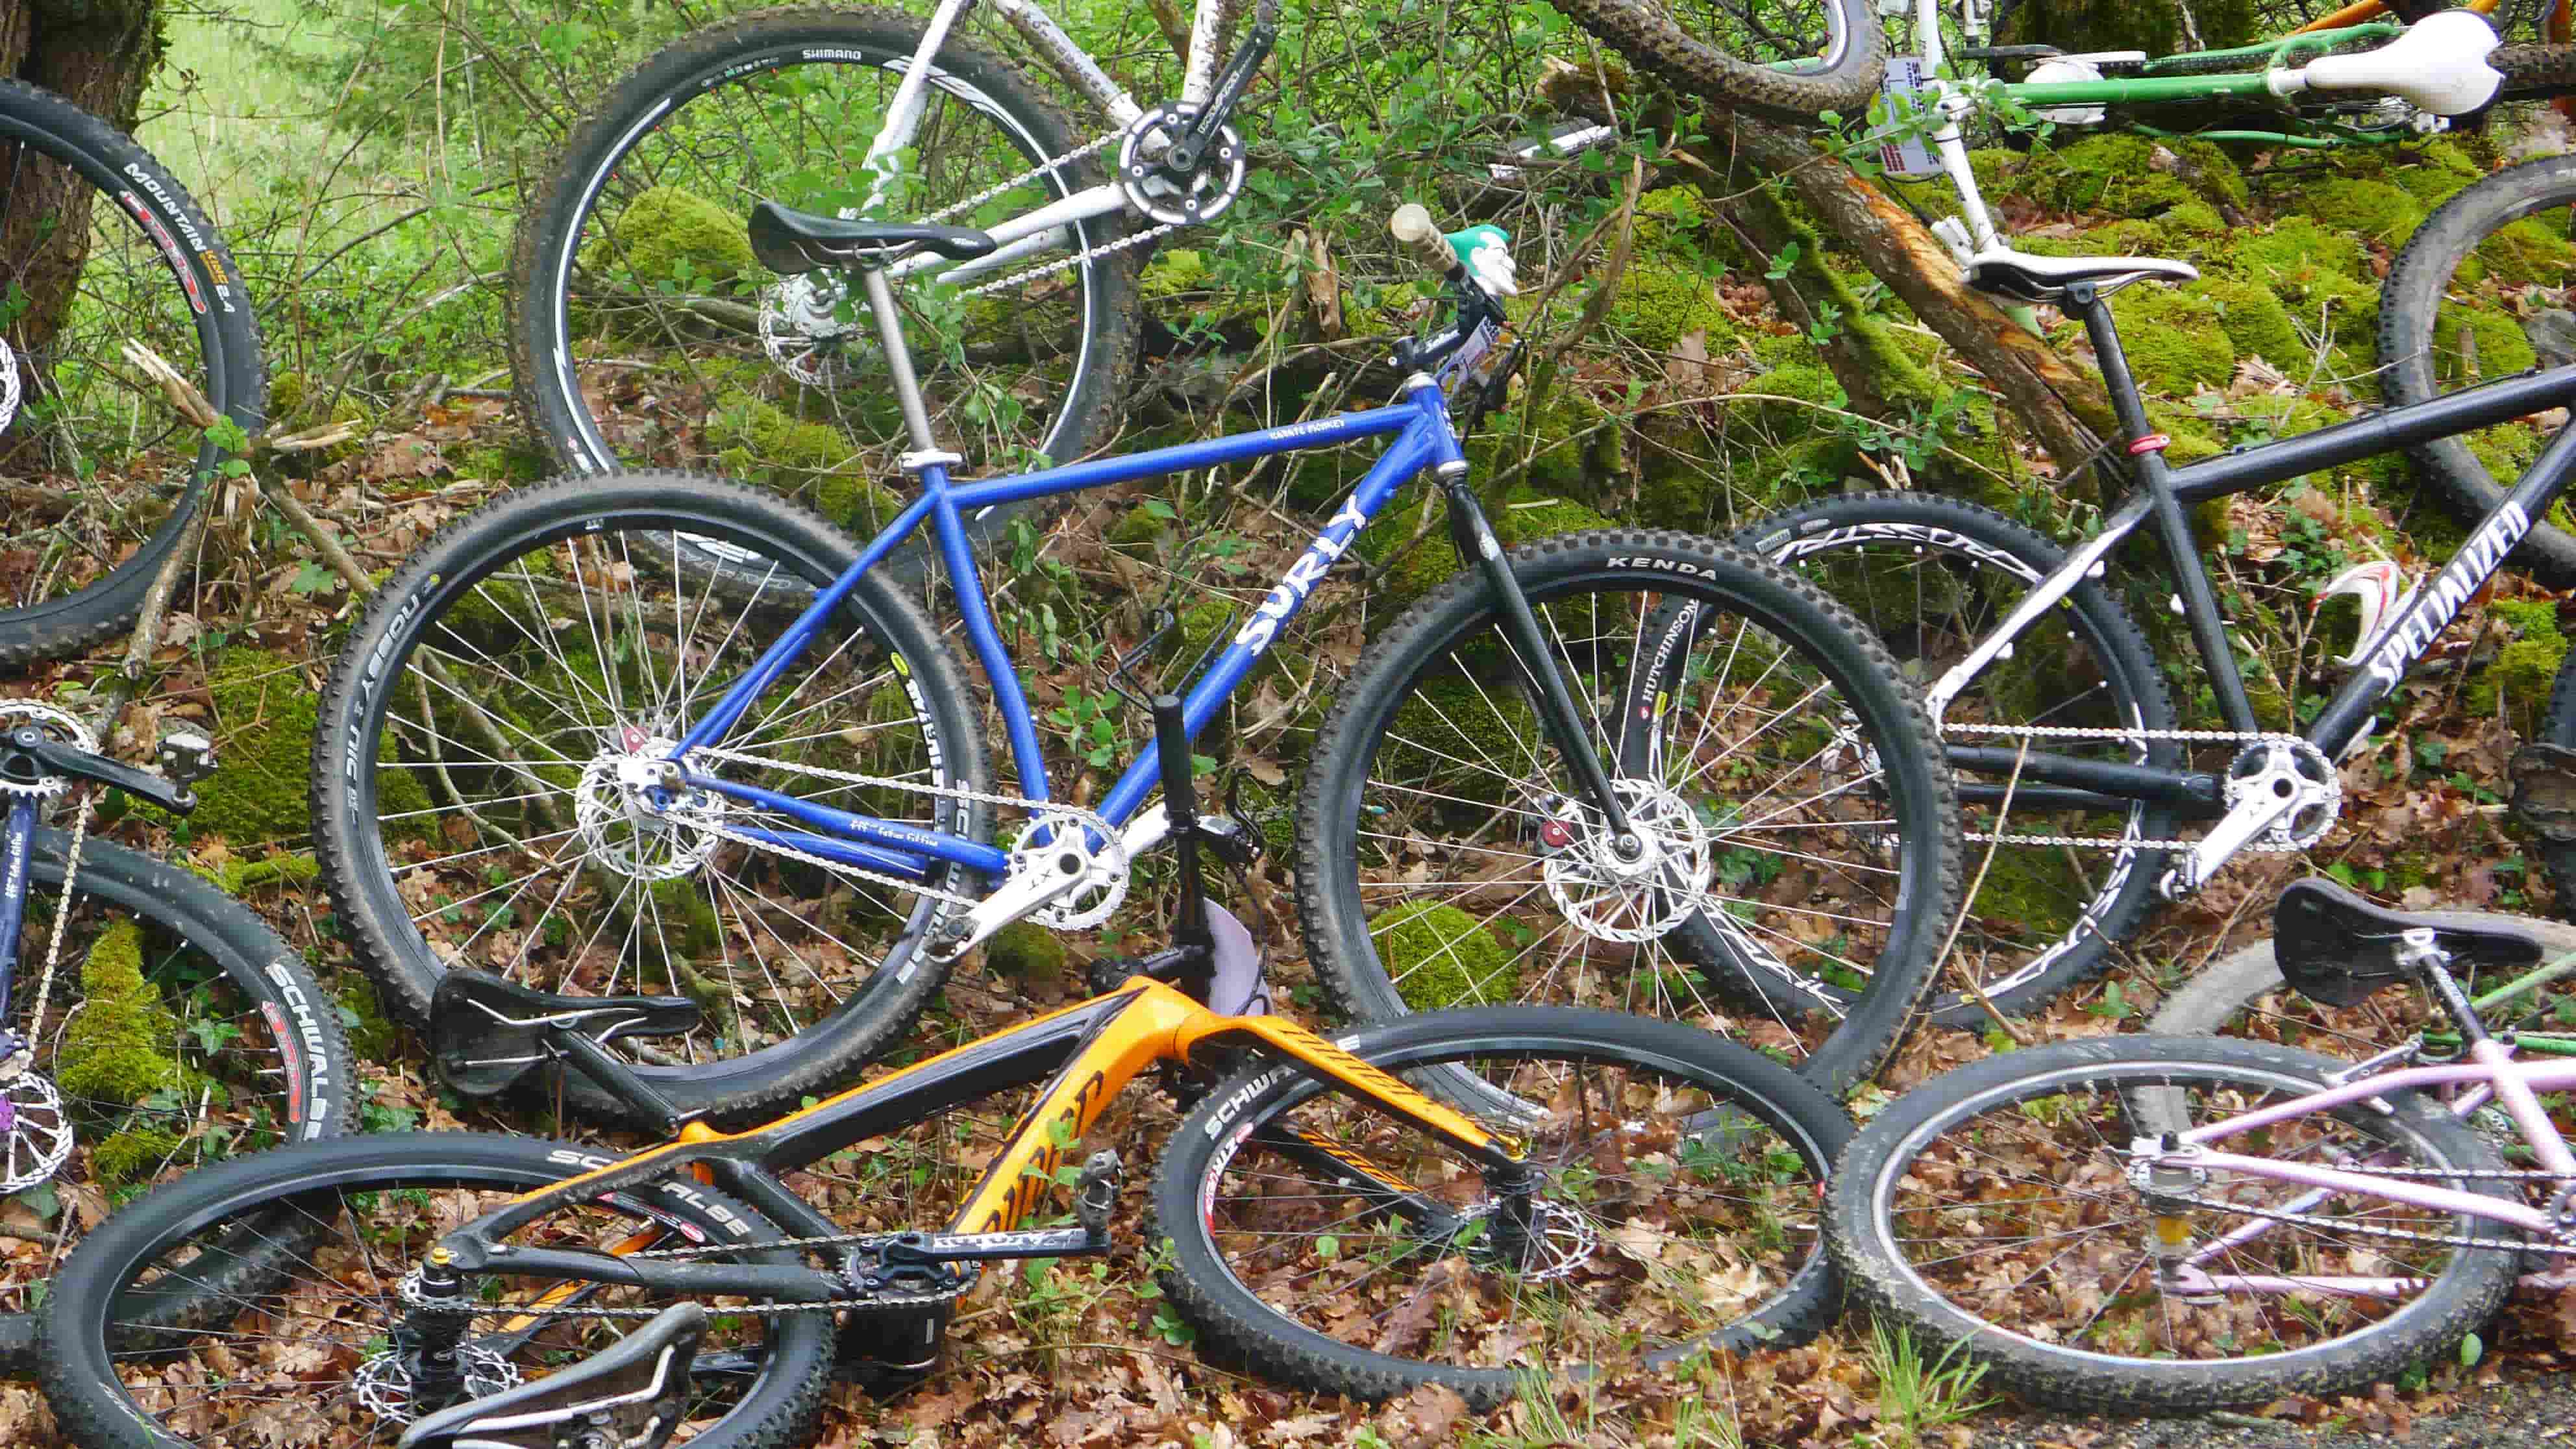 Right side view of a blue Surly Karate Monkey bike, leaning on a grass bank in the woods, with other bikes around it